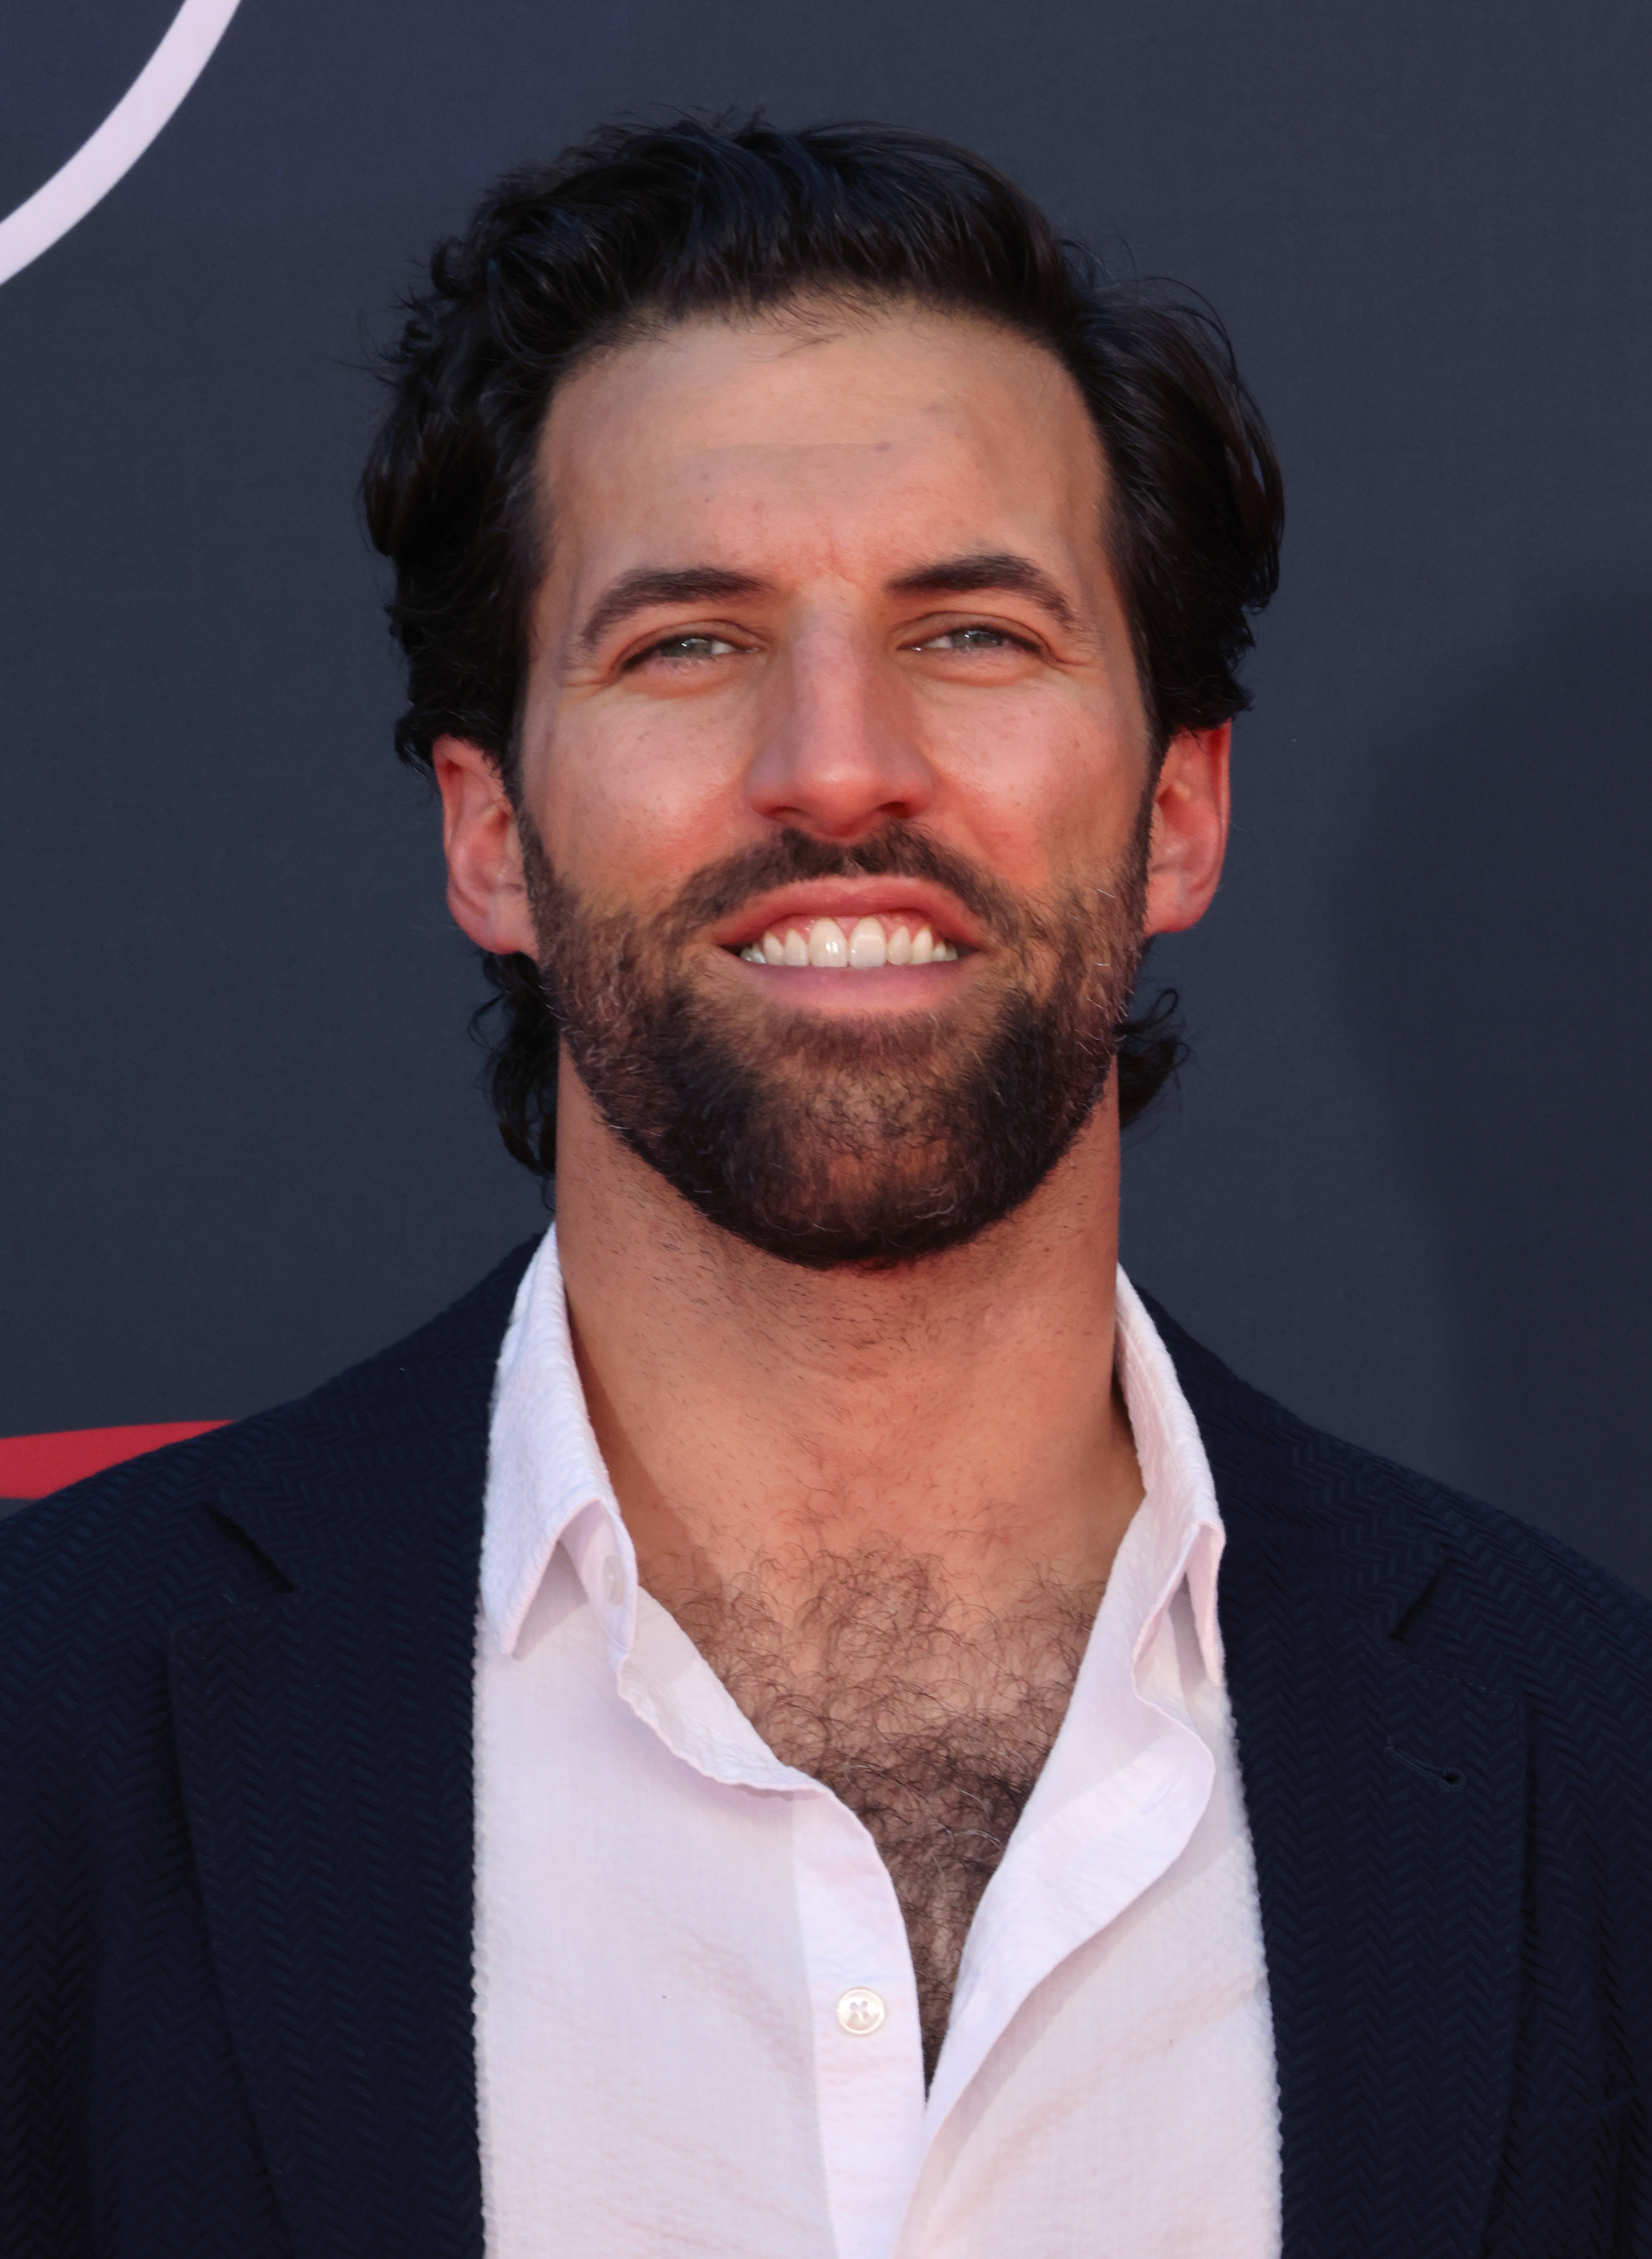 Paul Rabil at the 2023 ESPYs Awards on July 12, 2023, in Hollywood, California. | Source: Getty Images